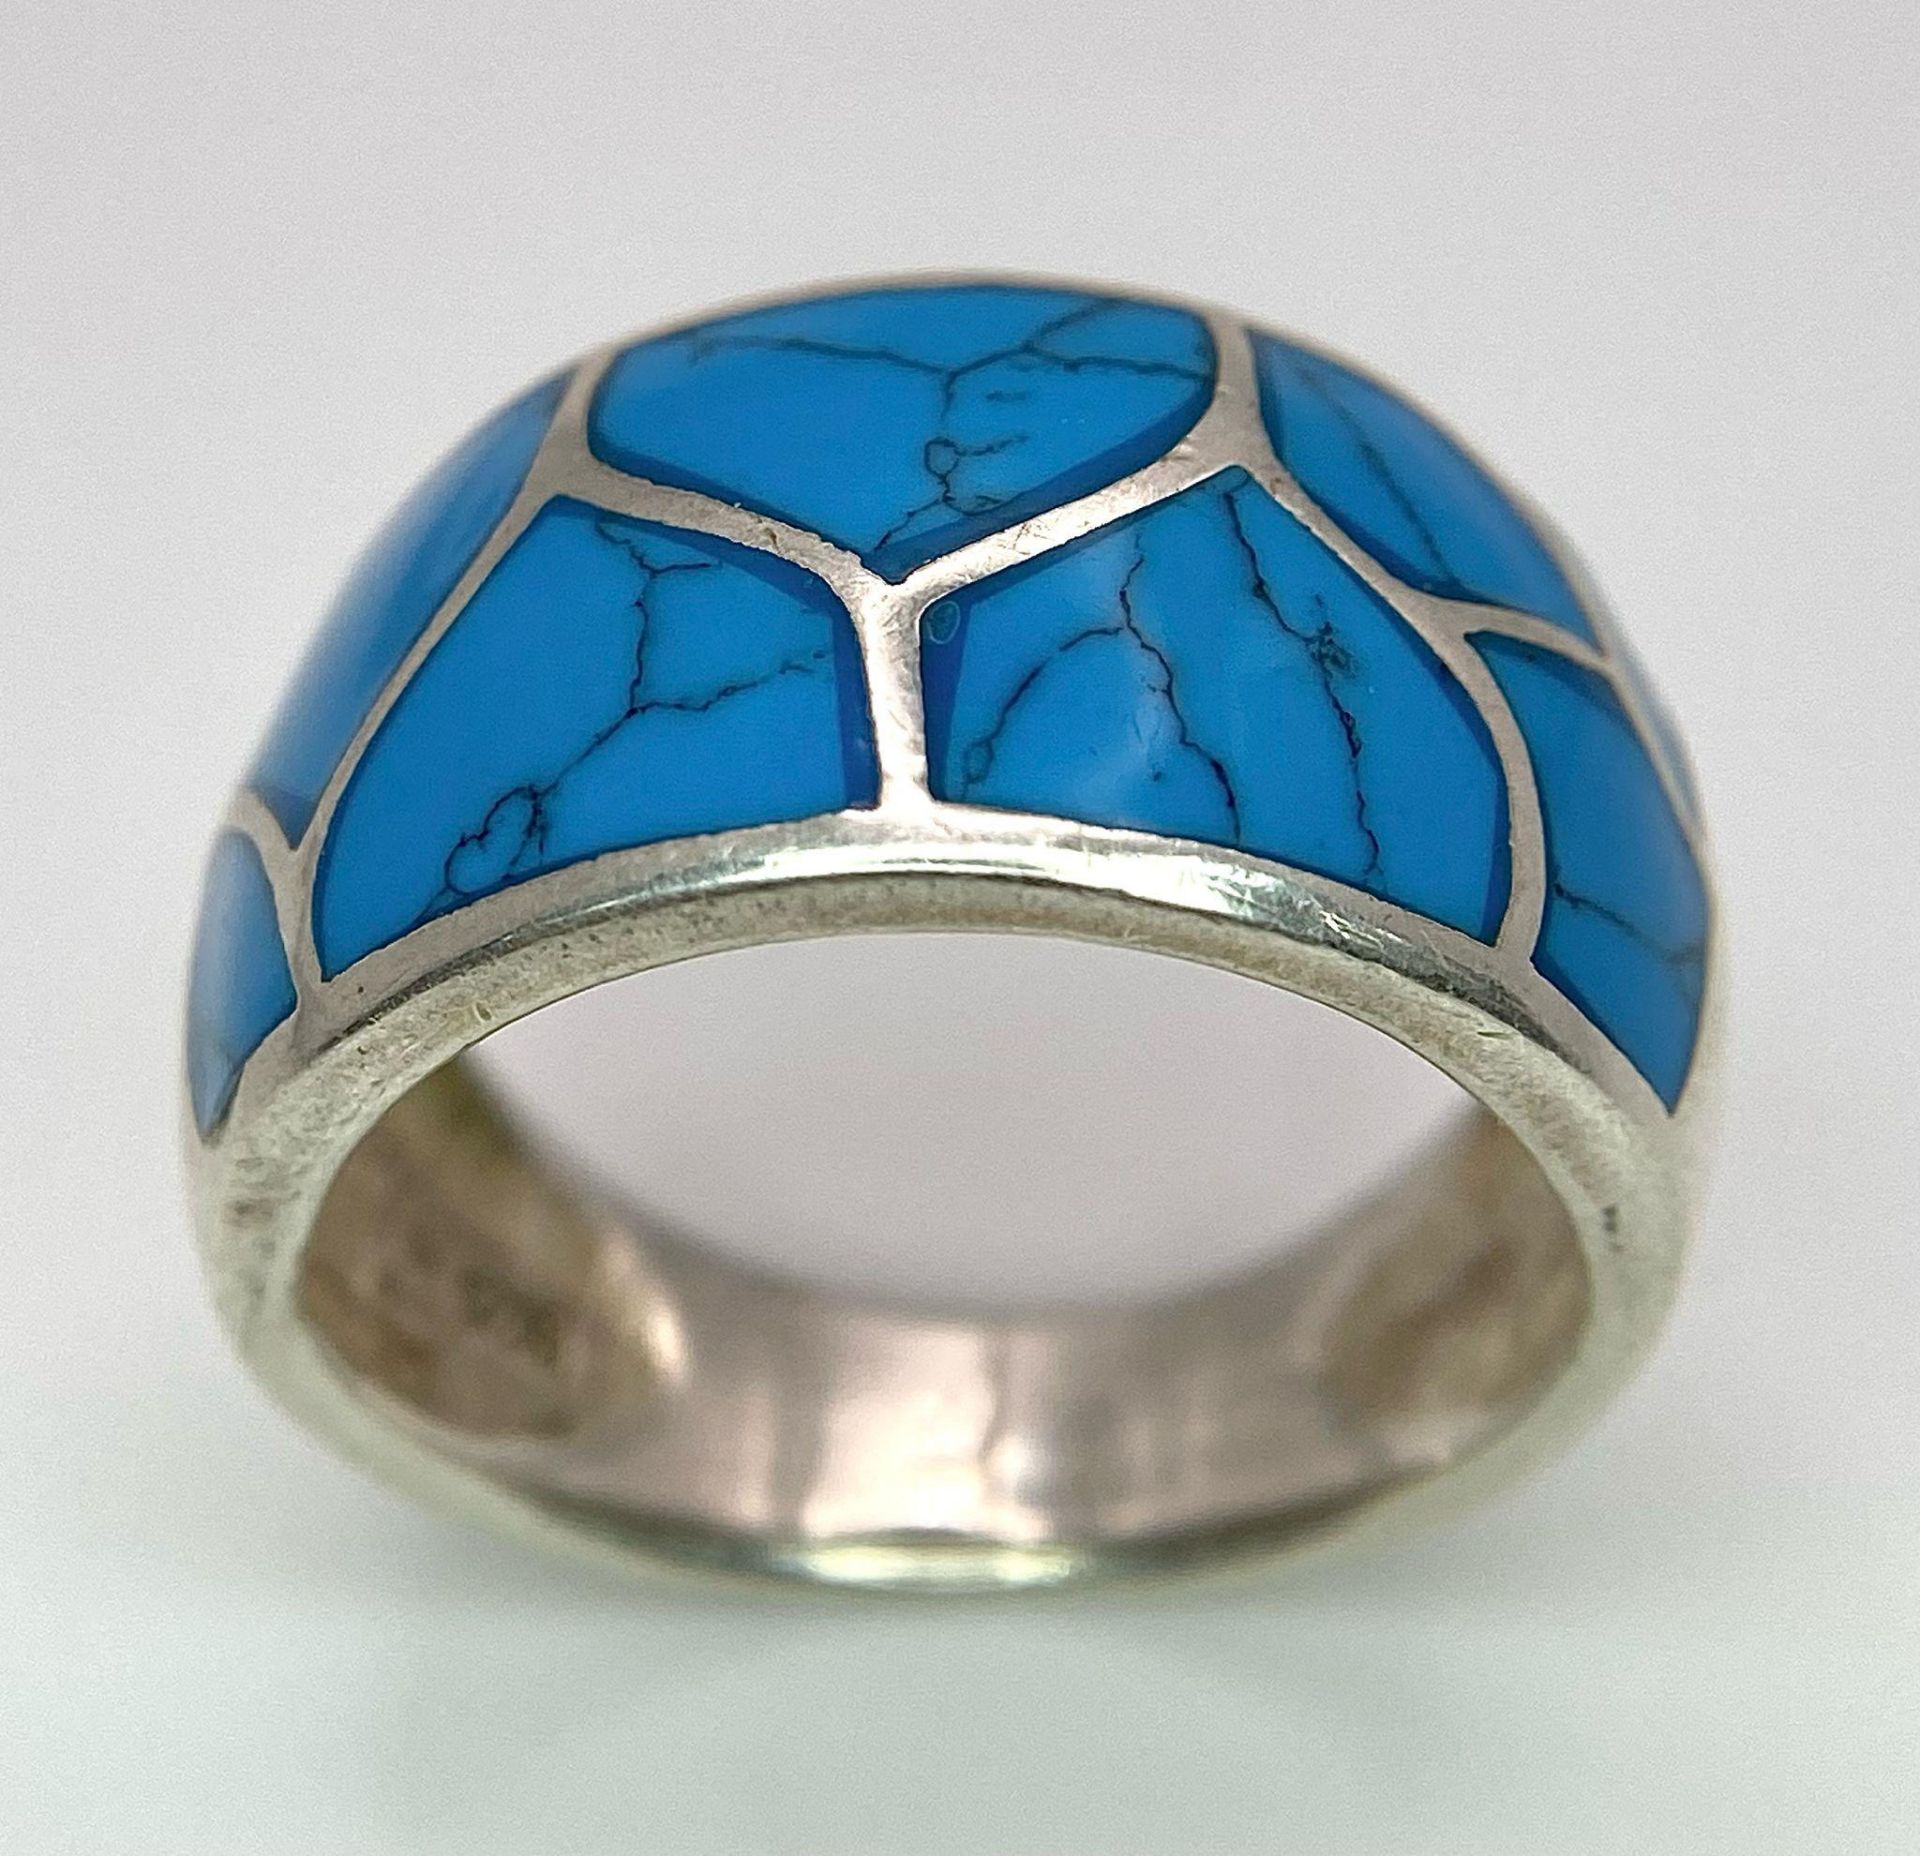 A LARGE STERLING SILVER AND TURQUOISE INLAY BAND RING, WEIGHT 6.4G, SIZE P ,REF SC 4127